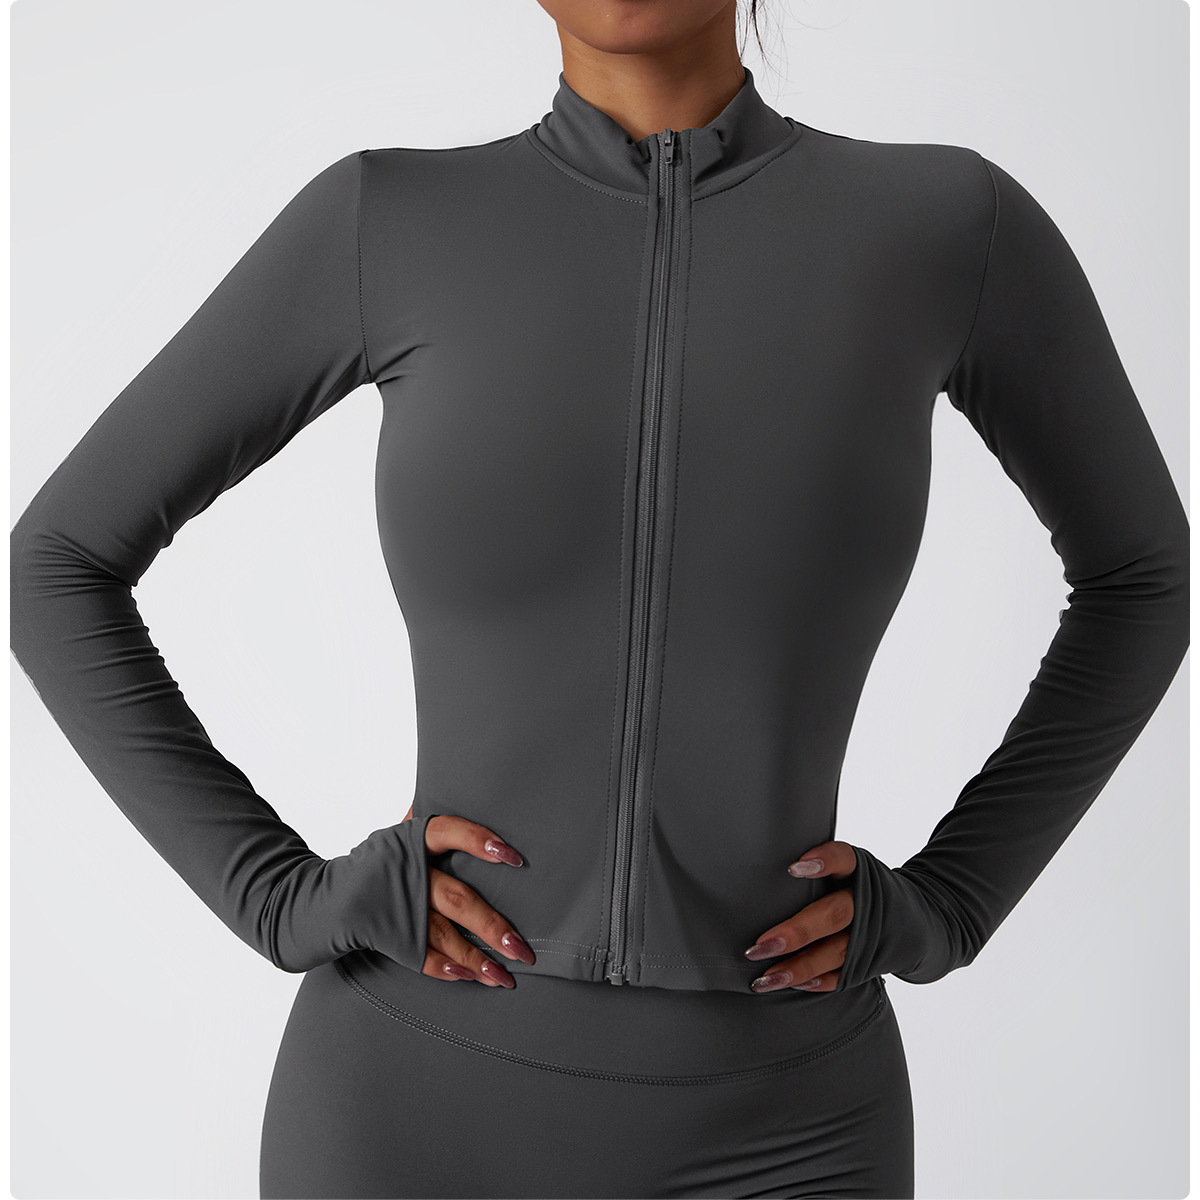 New Nude Yoga Sets Autumn And Winter Zipper Long Sleeve Fitness Sets Slim Running Fitness Suit